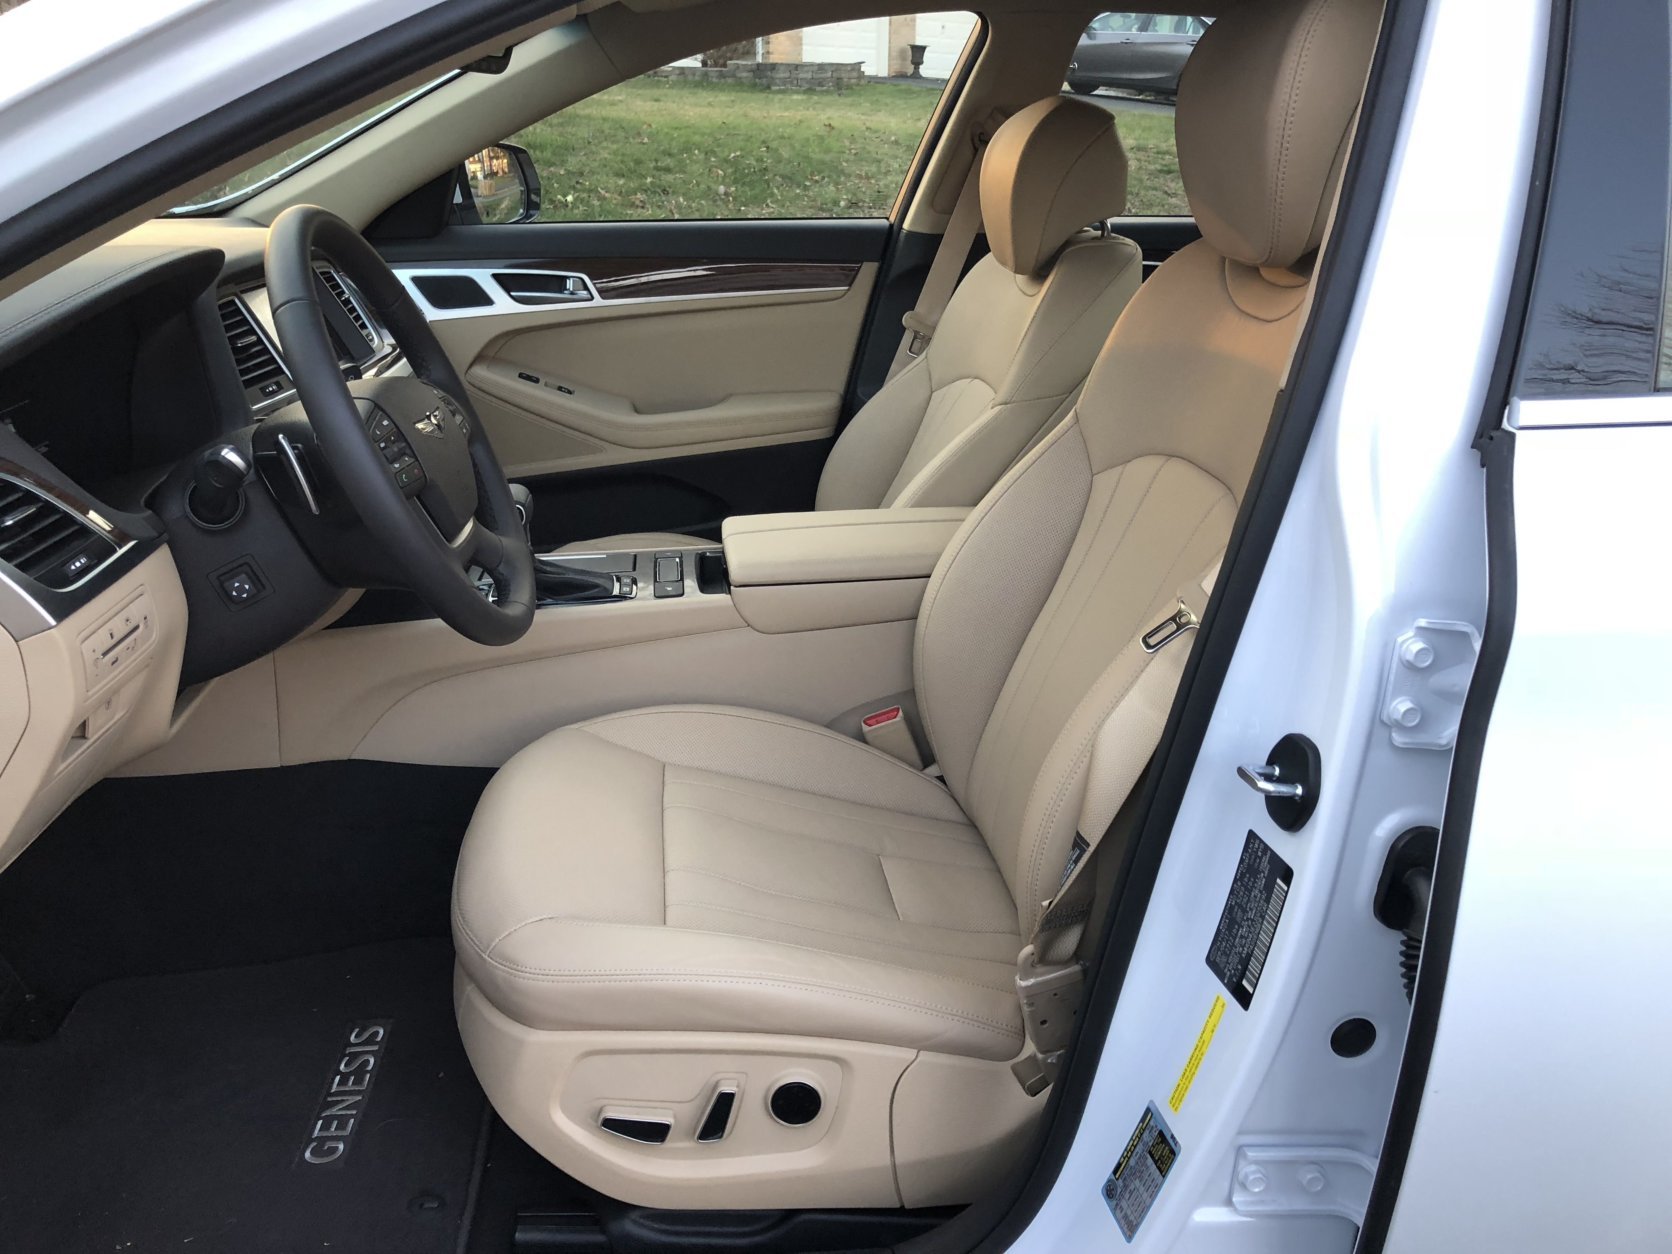 The Genesis G80 has heated leather seats with 12-way power adjustments for those in the front seats. (WTOP/Mike Parris)